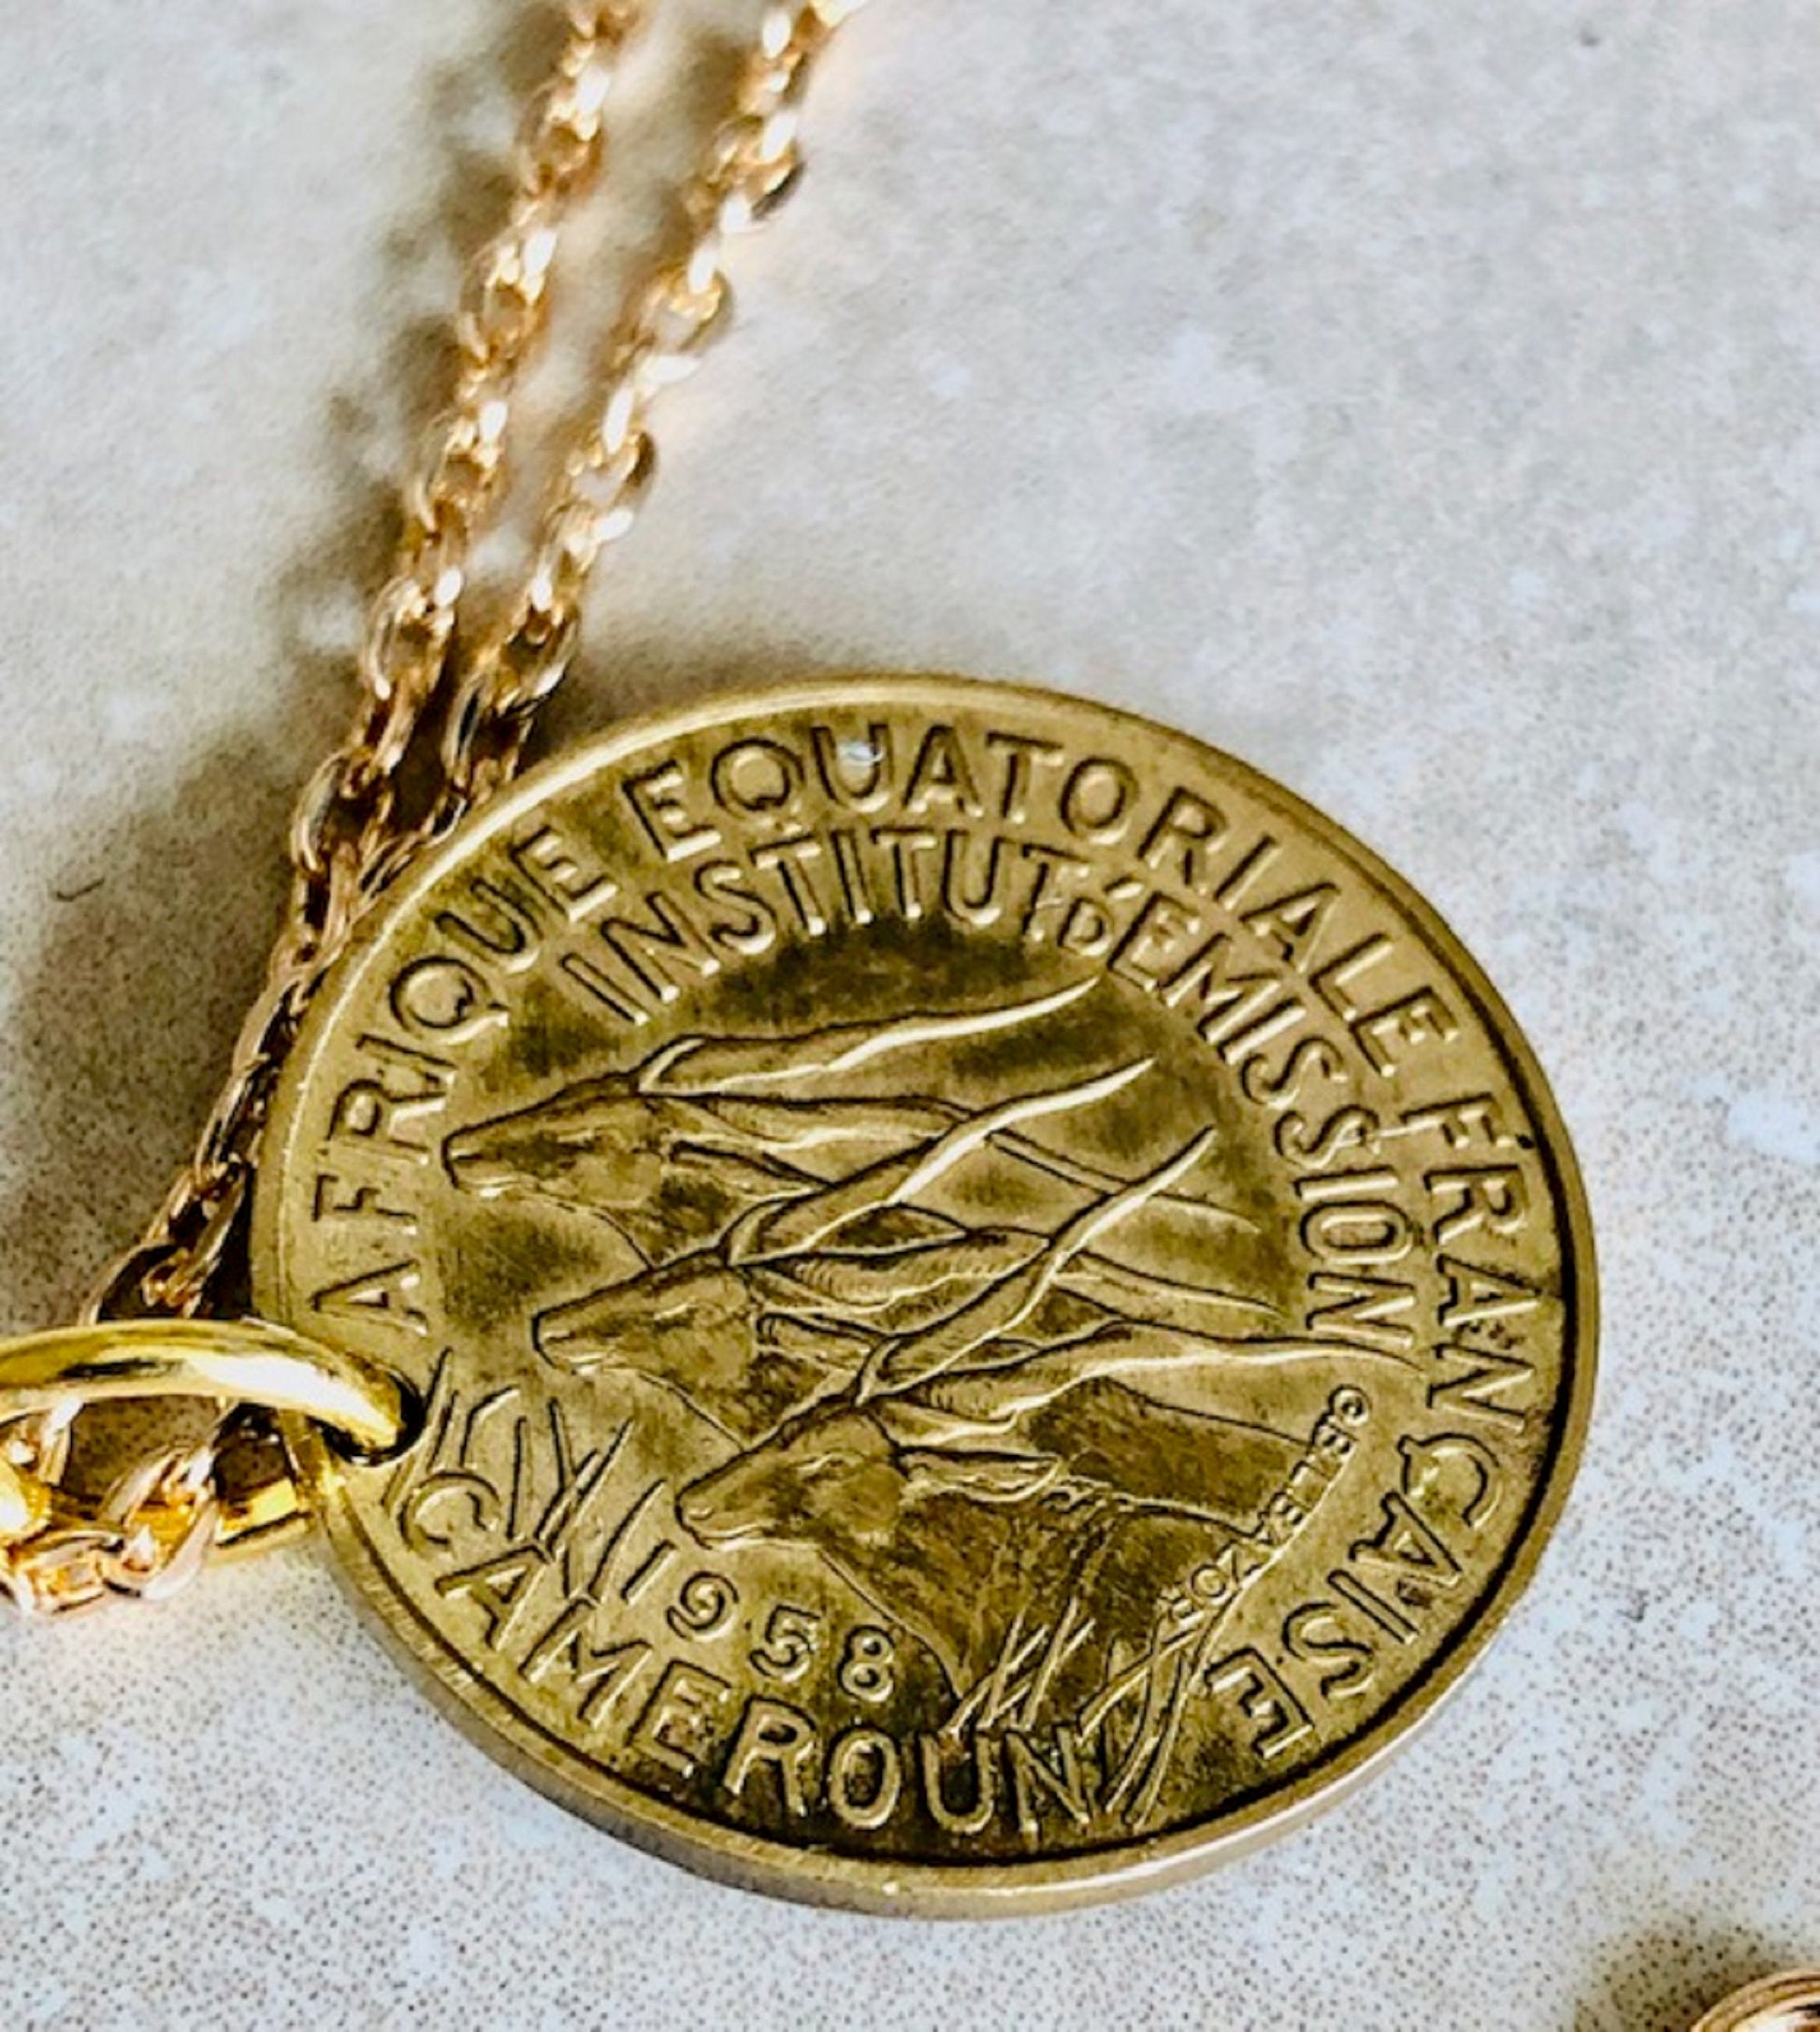 Africa Cameroon Coin Necklace Cameroun Pendant 10 Francs Necklace Old Handmade Jewelry Gift Friend Charm For Him Her World Coin Collector